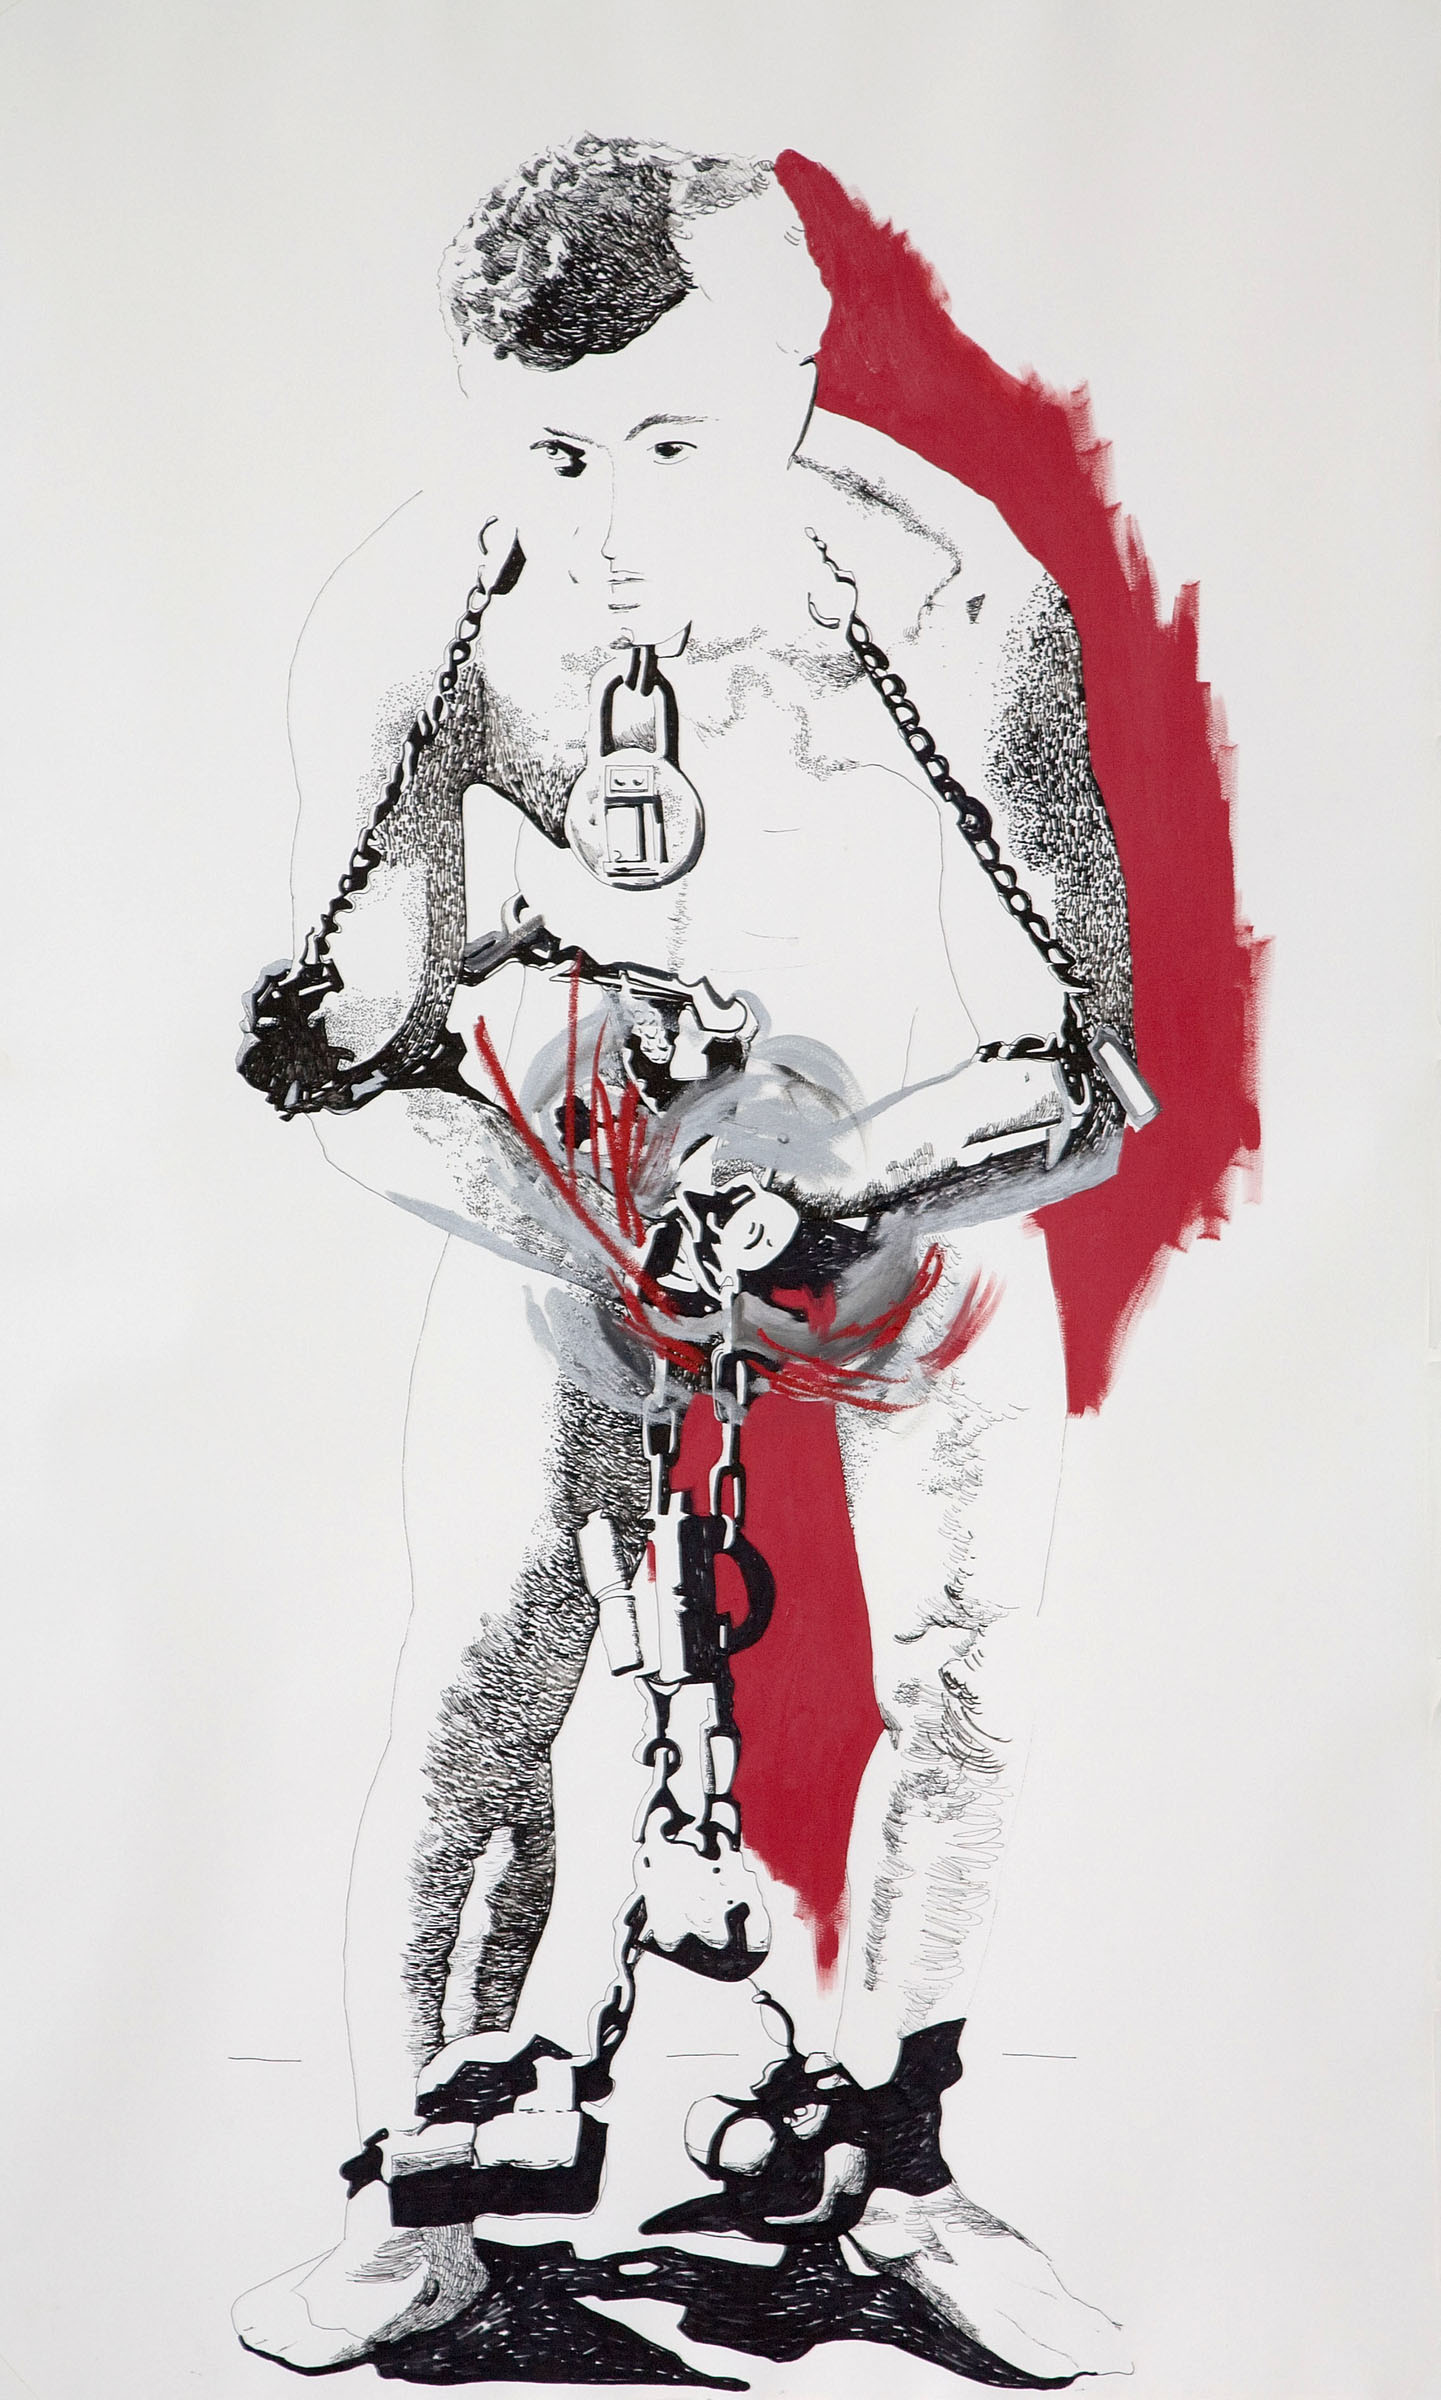  "Houdini (Pink Shadow)" (2007)  Ink and oil on unprinted paper  72 x 44.5 in 